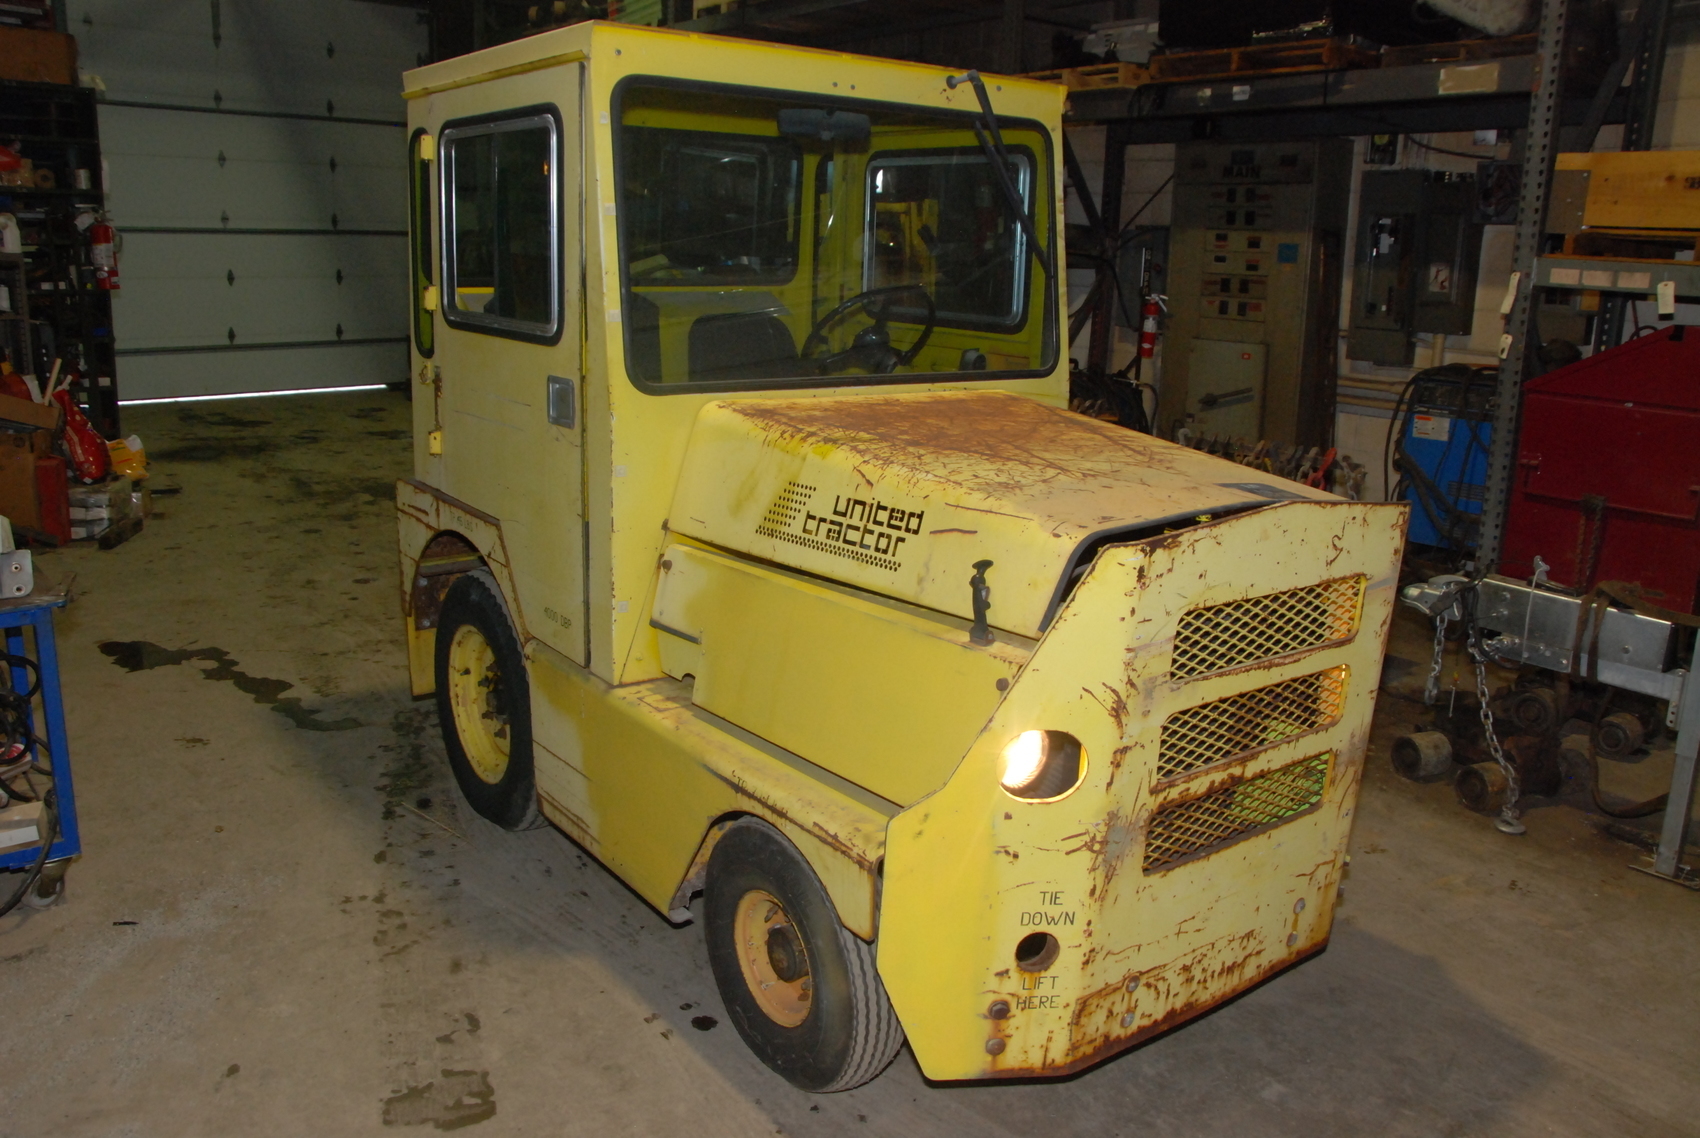 U.S.ARMY TOW TRACTOR WHEELED SM-340-4 A9,361 hrs propane!